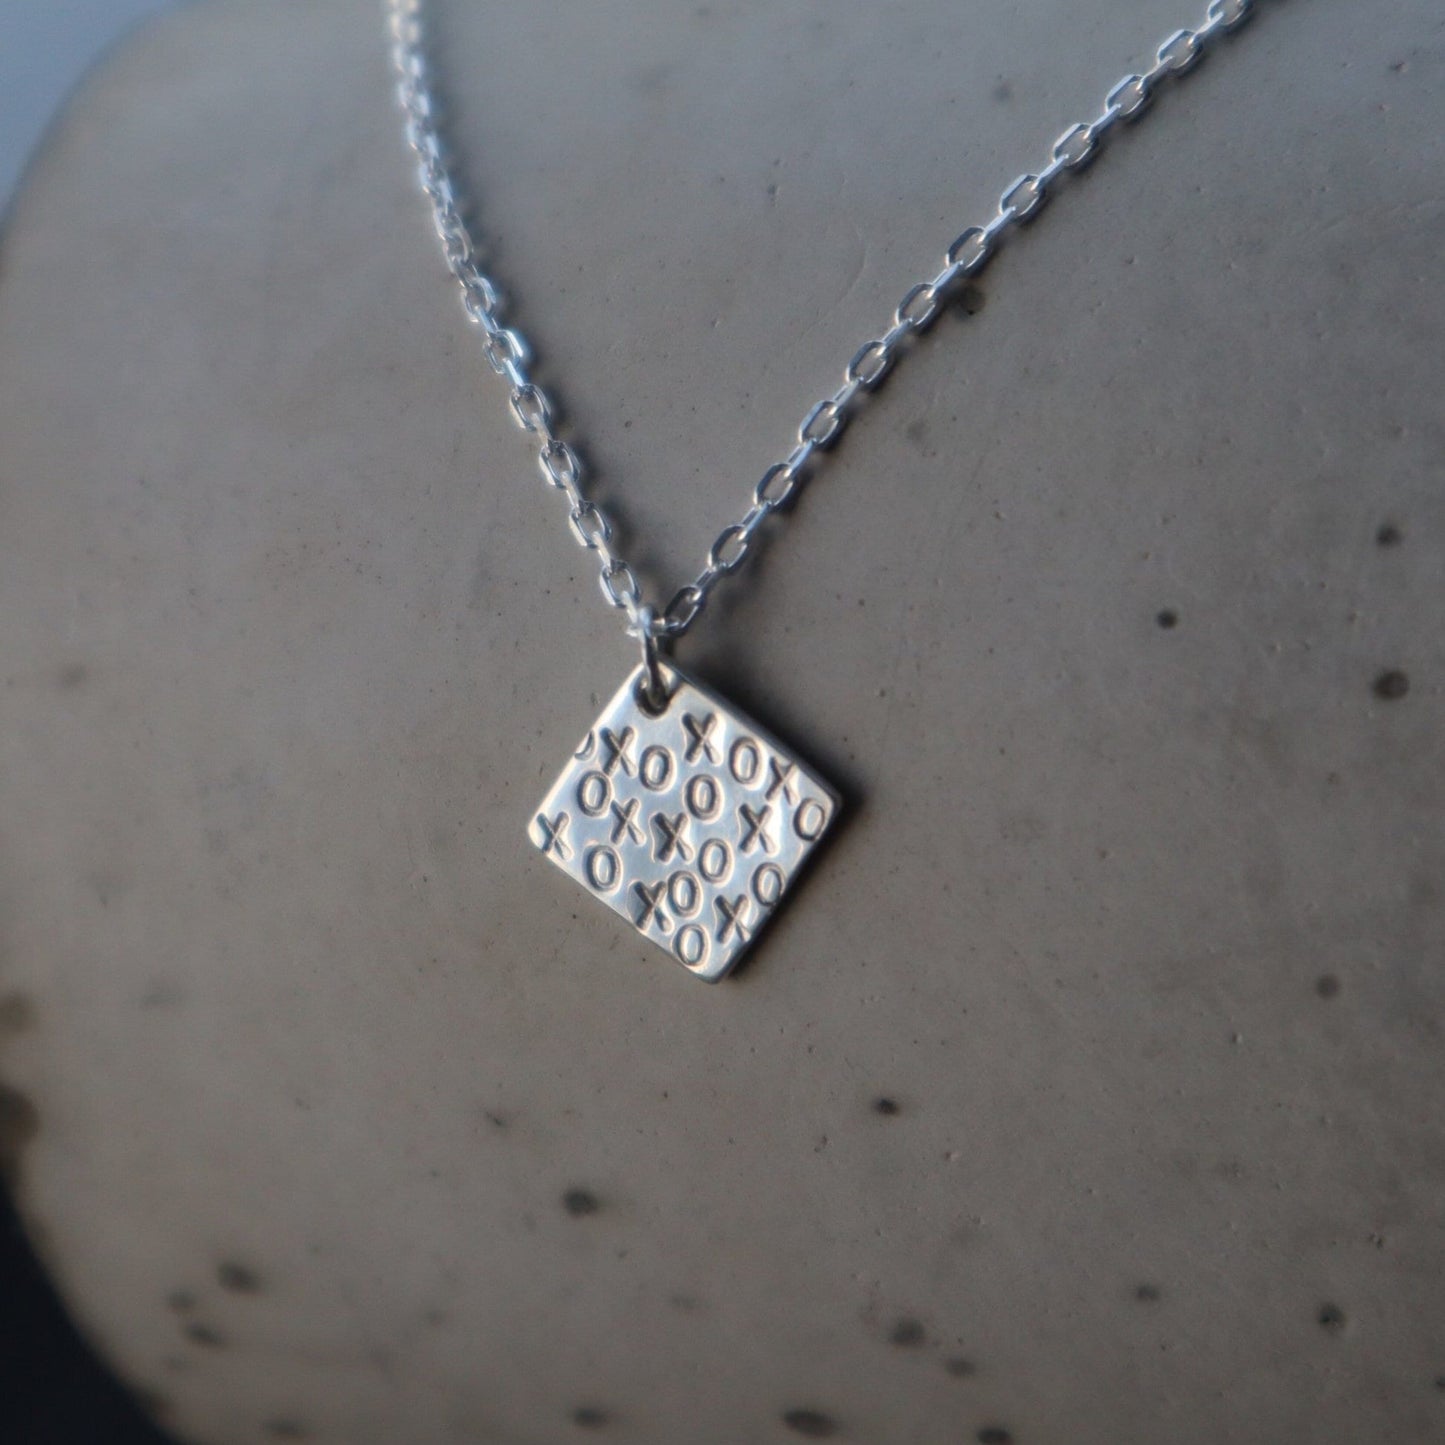 XOXO Pendant on a Sterling Silver Chain displayed on a cement background.